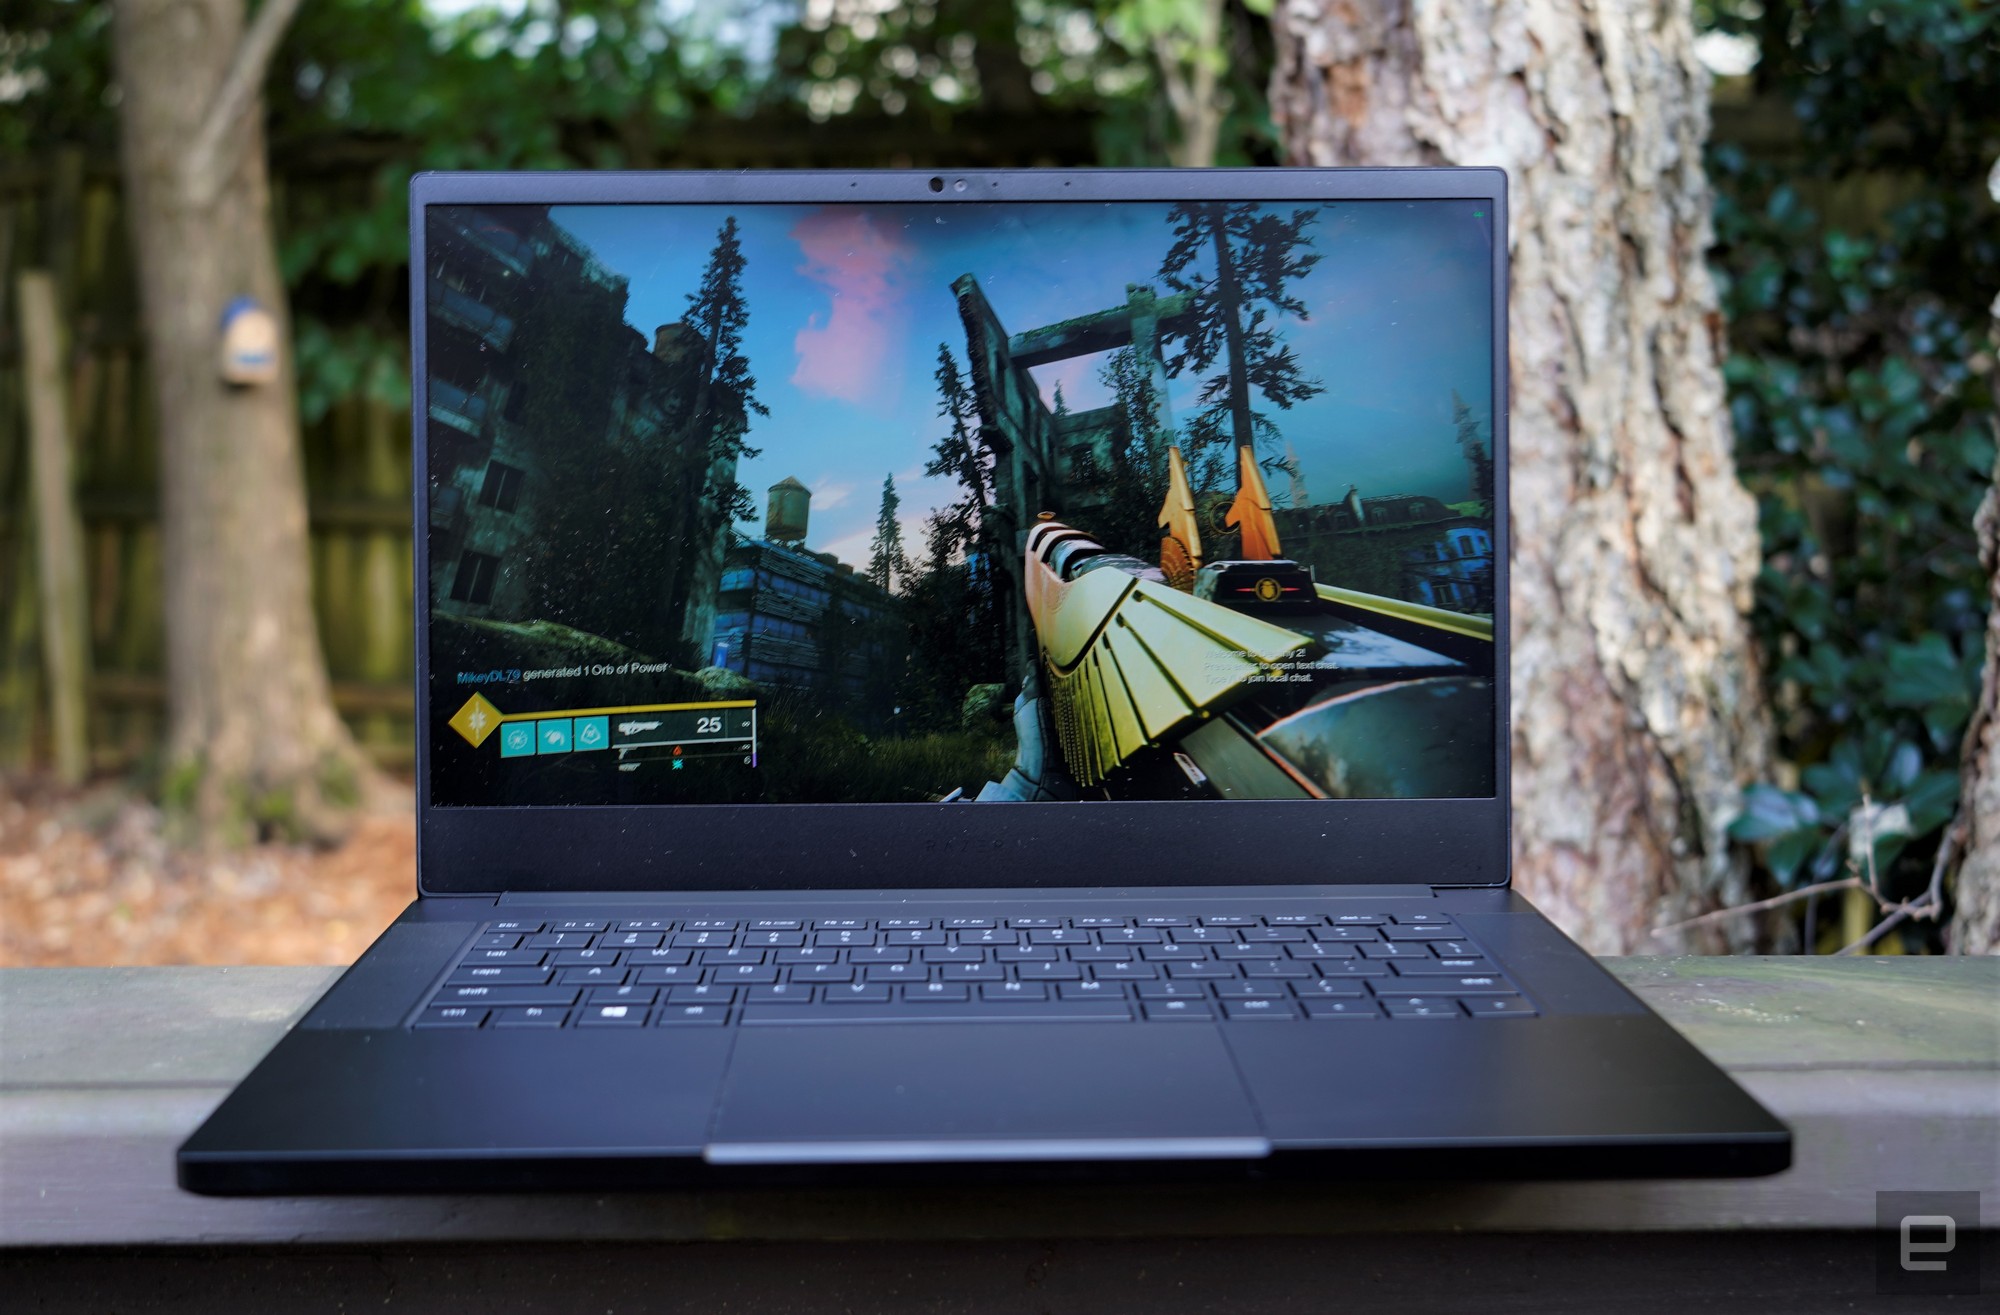 Razer's Blade 14 gaming laptop is $800 off for Amazon's October Prime Day